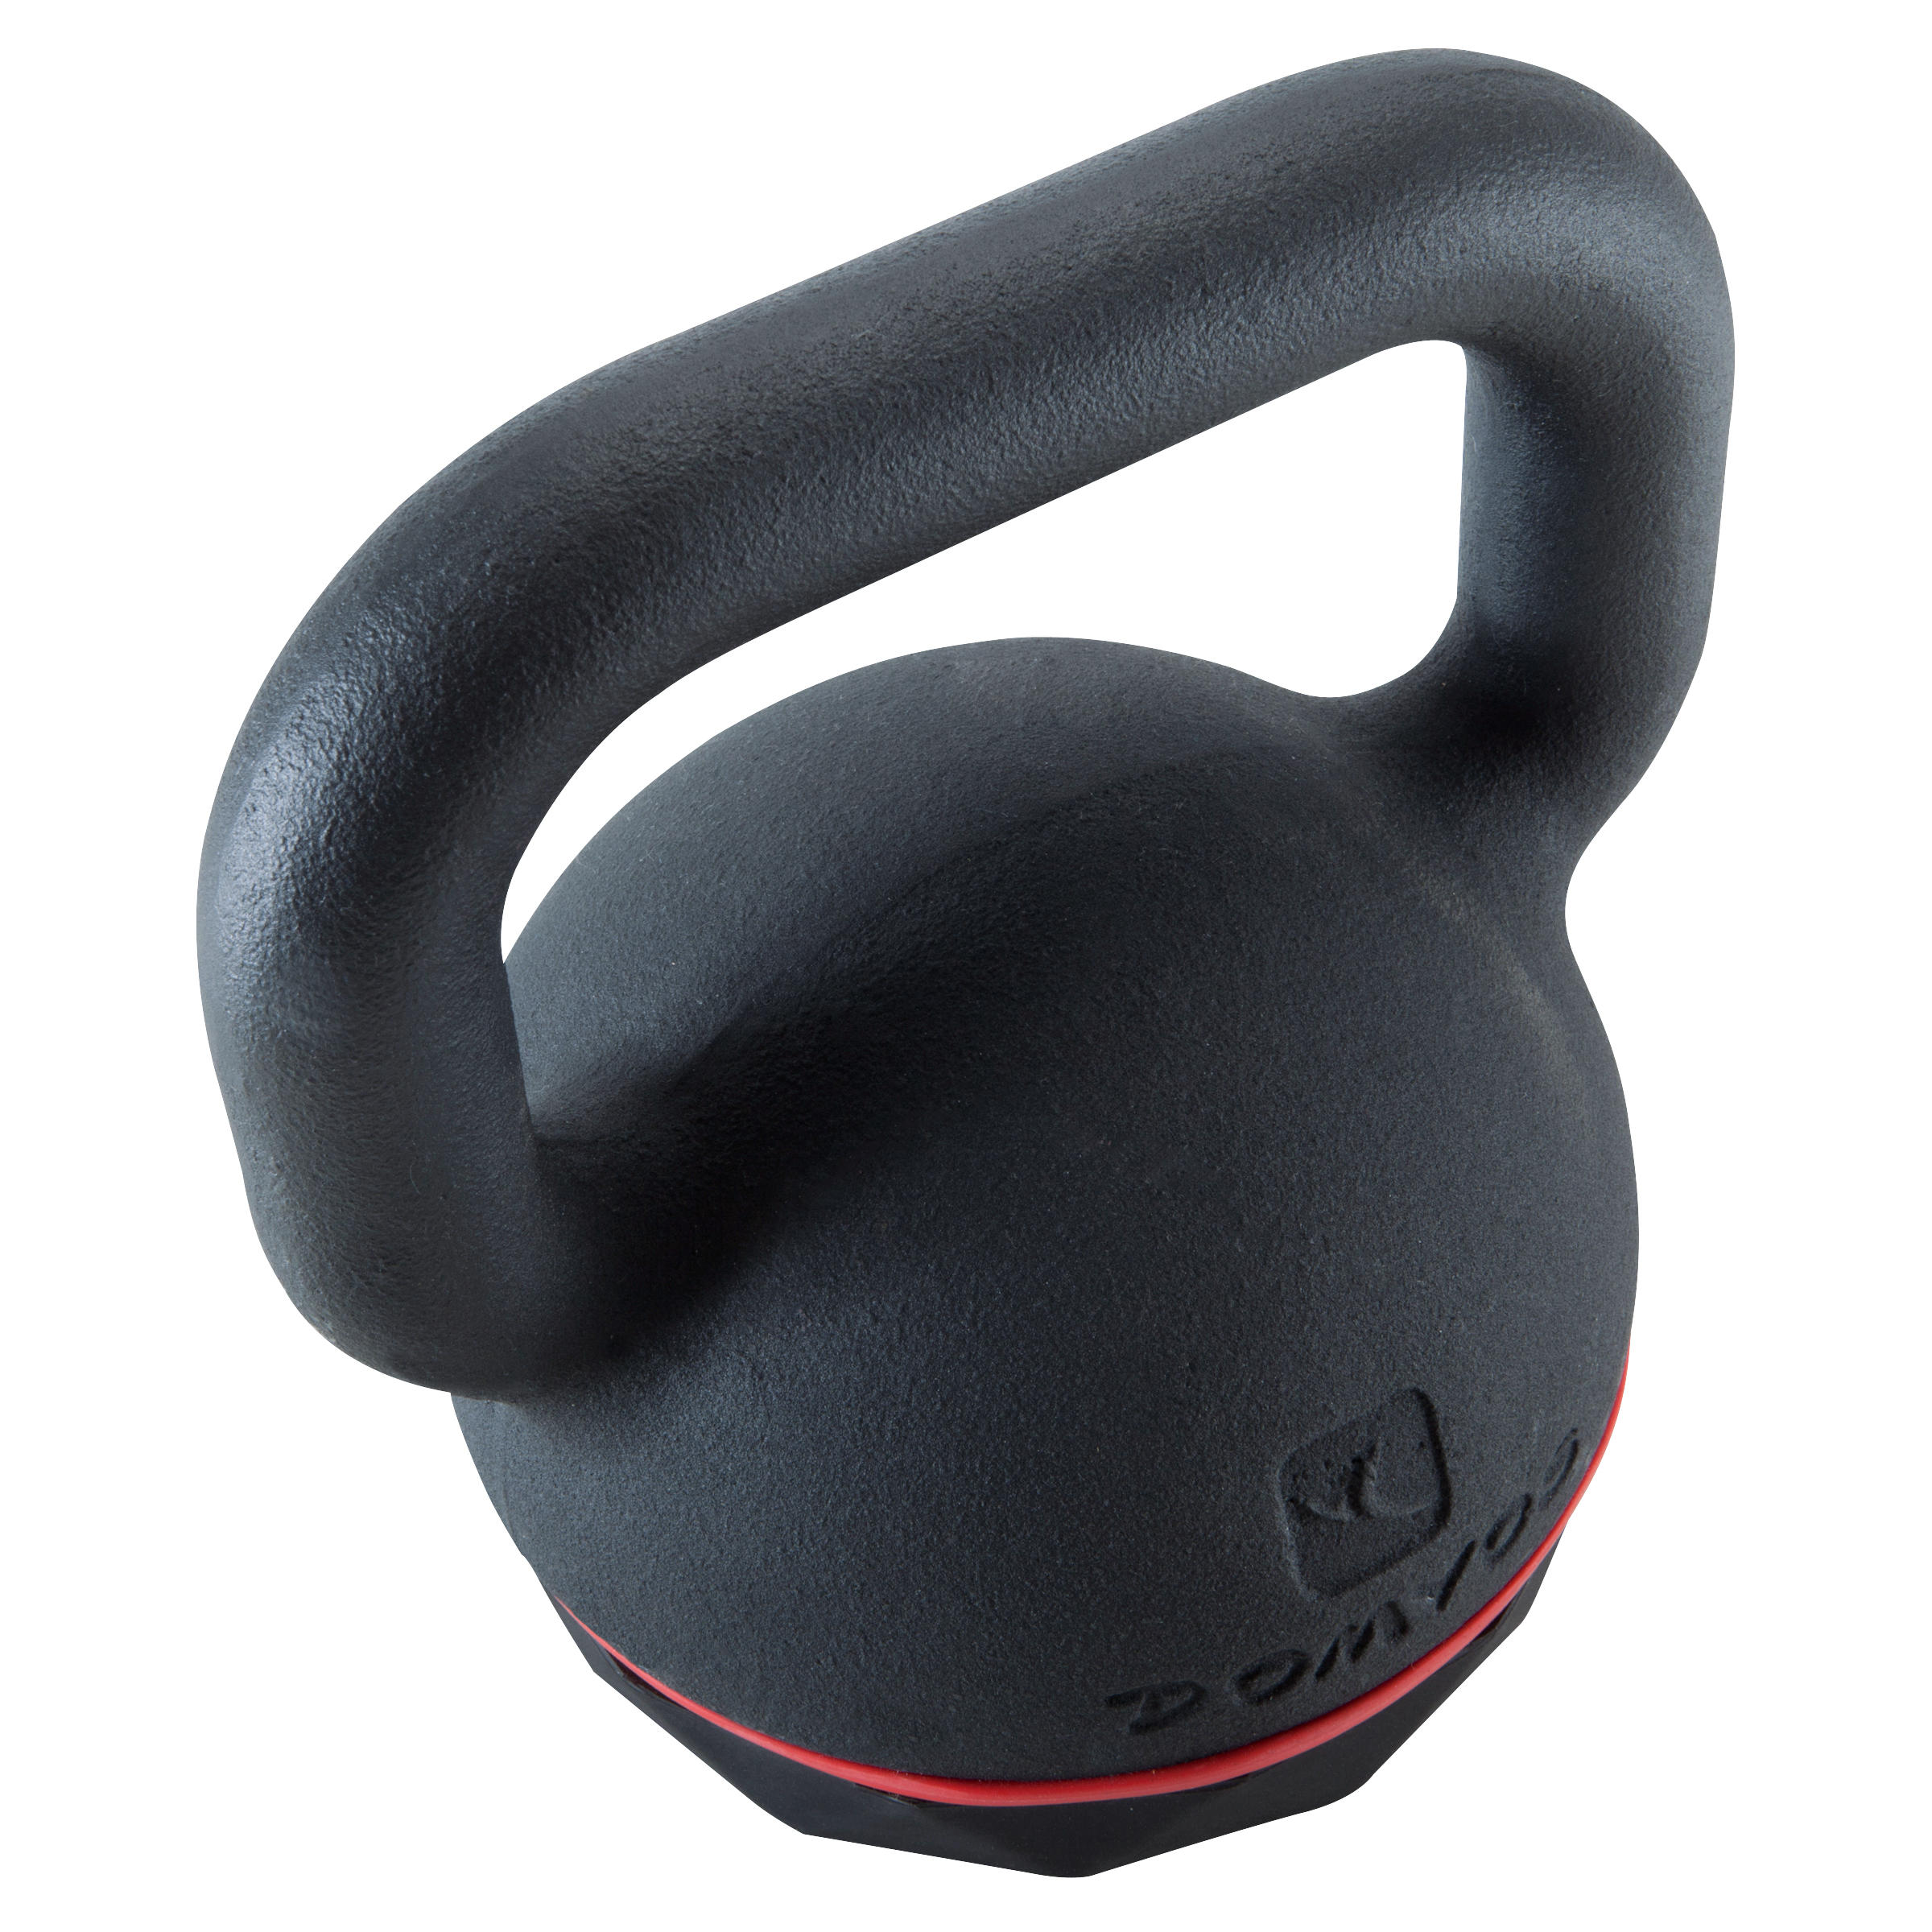 Cast Iron Kettlebell with Rubber Base - 20 kg 4/9